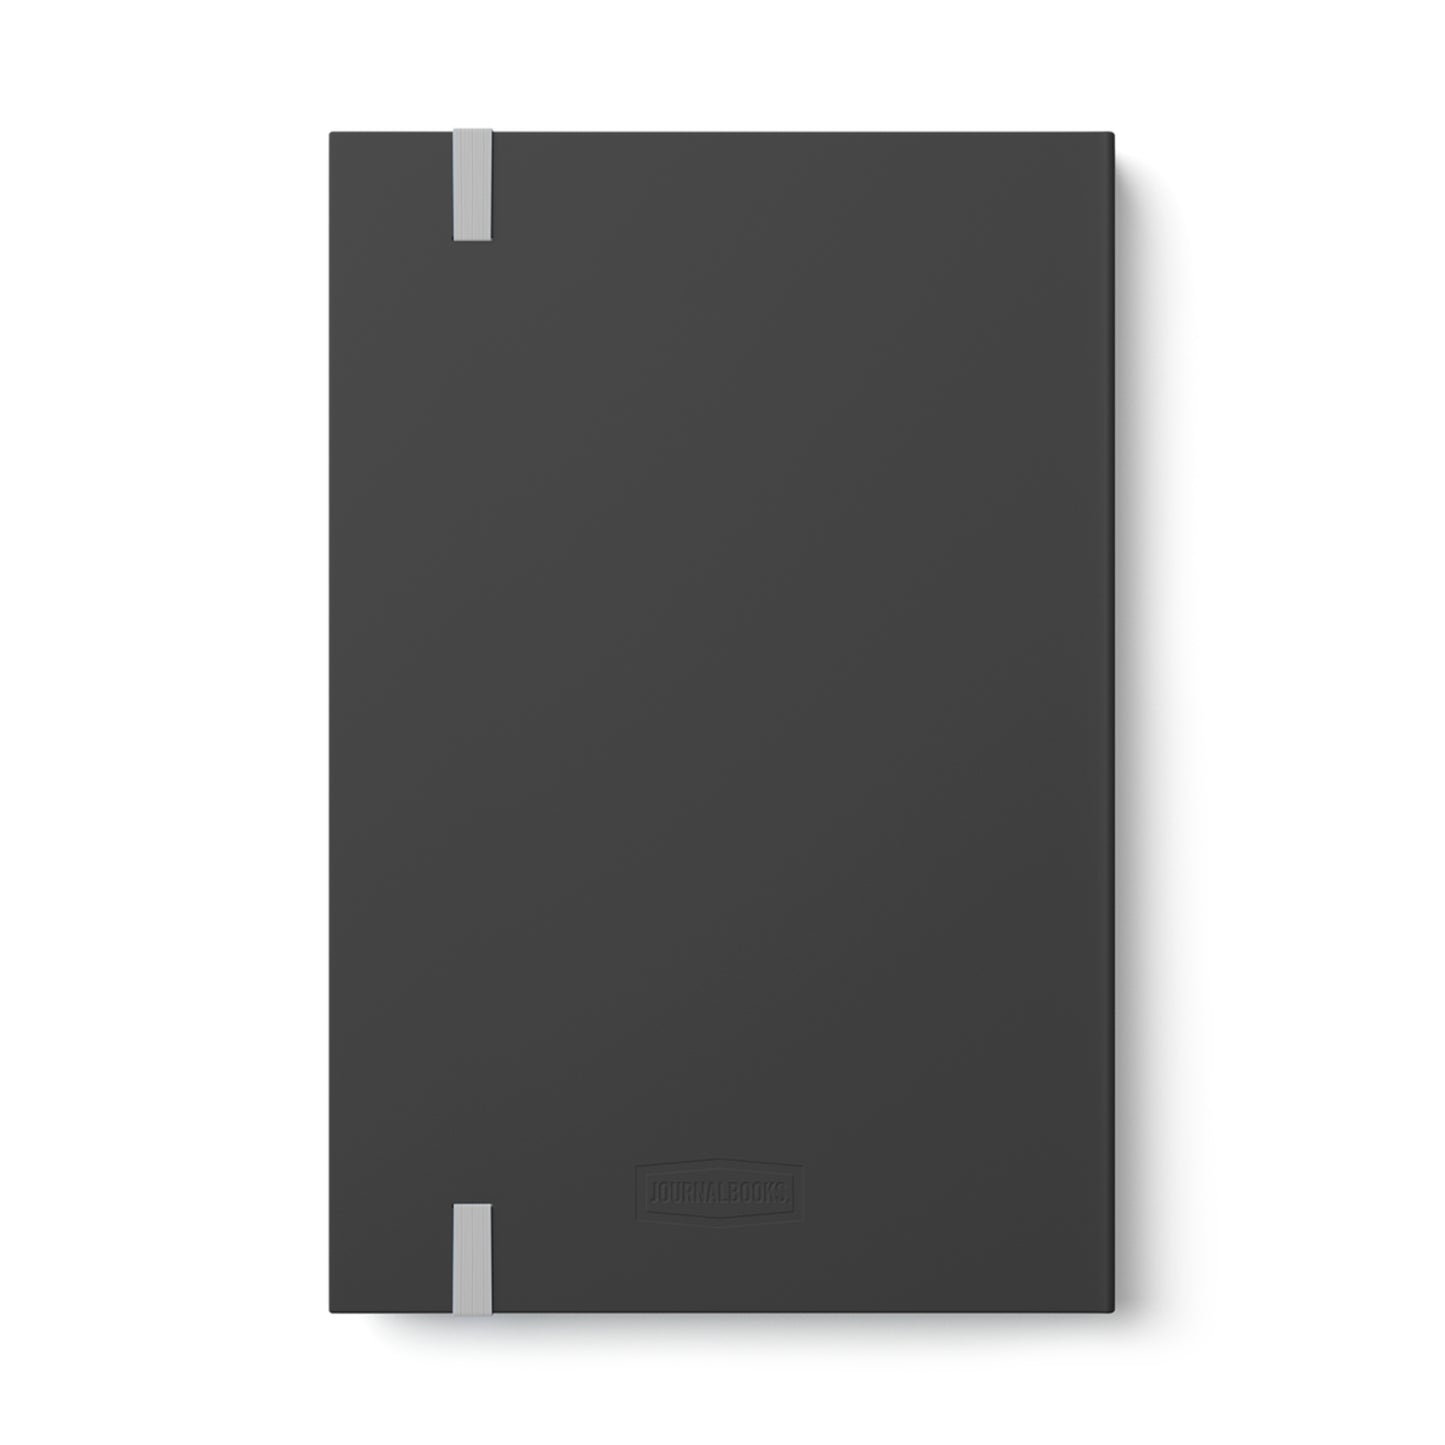 Dare! - Color Contrast Notebook - Ruled